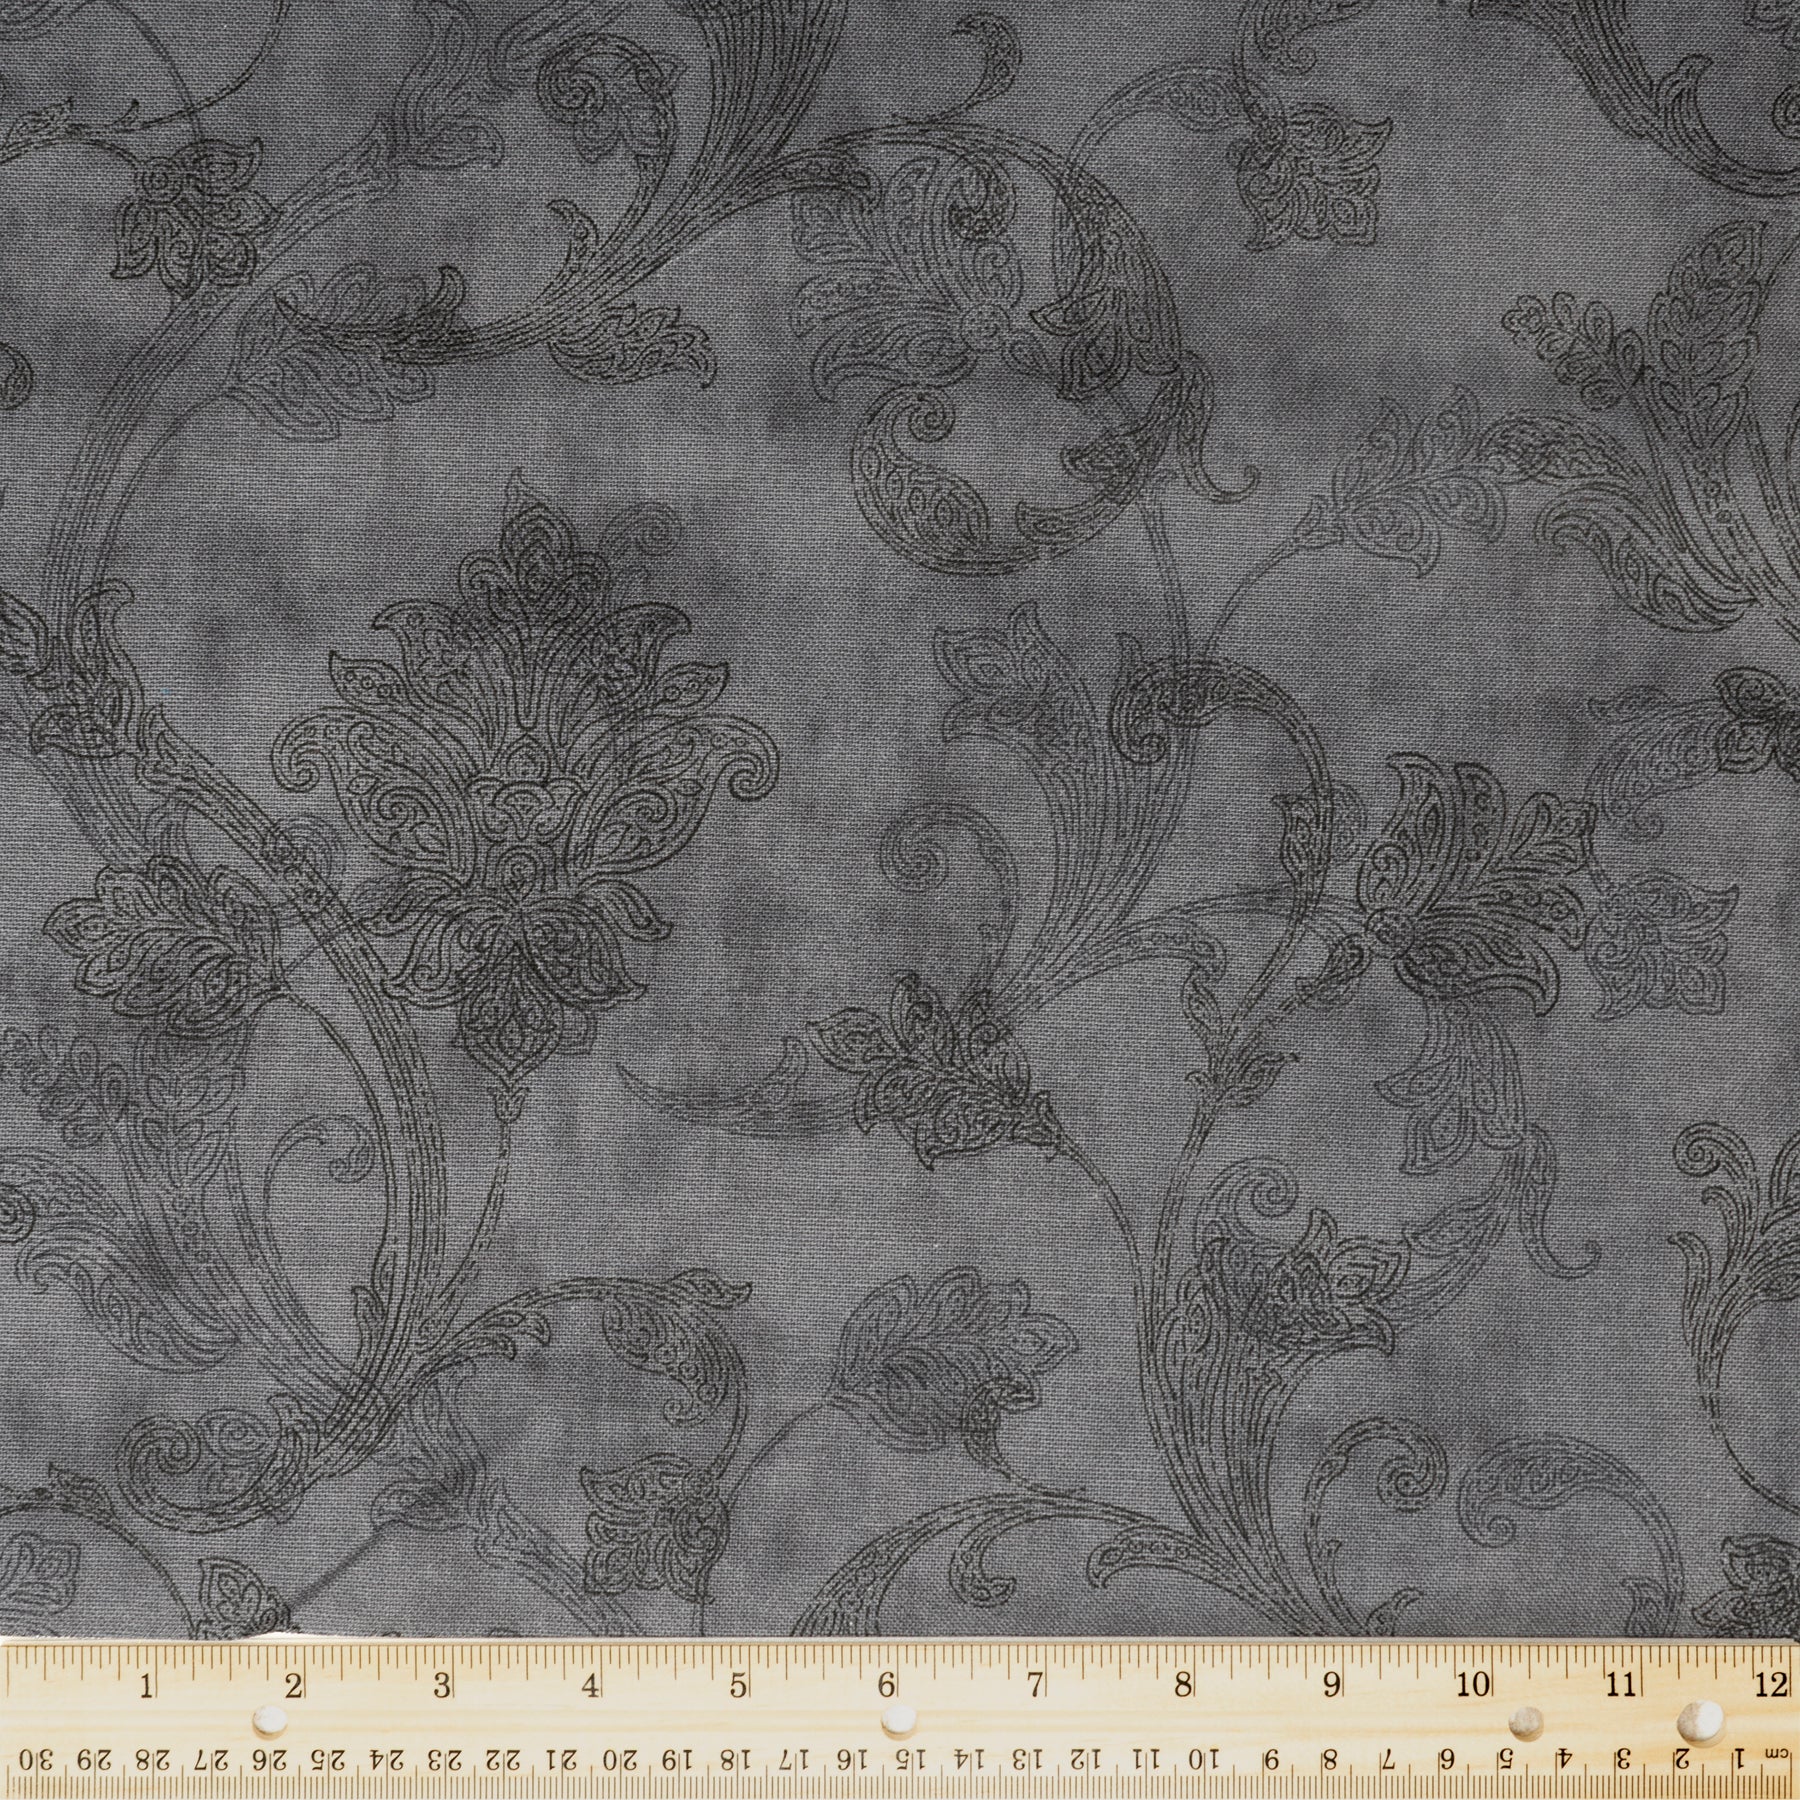 Waverly Inspirations 100% Cotton Duck 54" Jacobean Scroll Print Black Color Sewing Fabric by the Yard